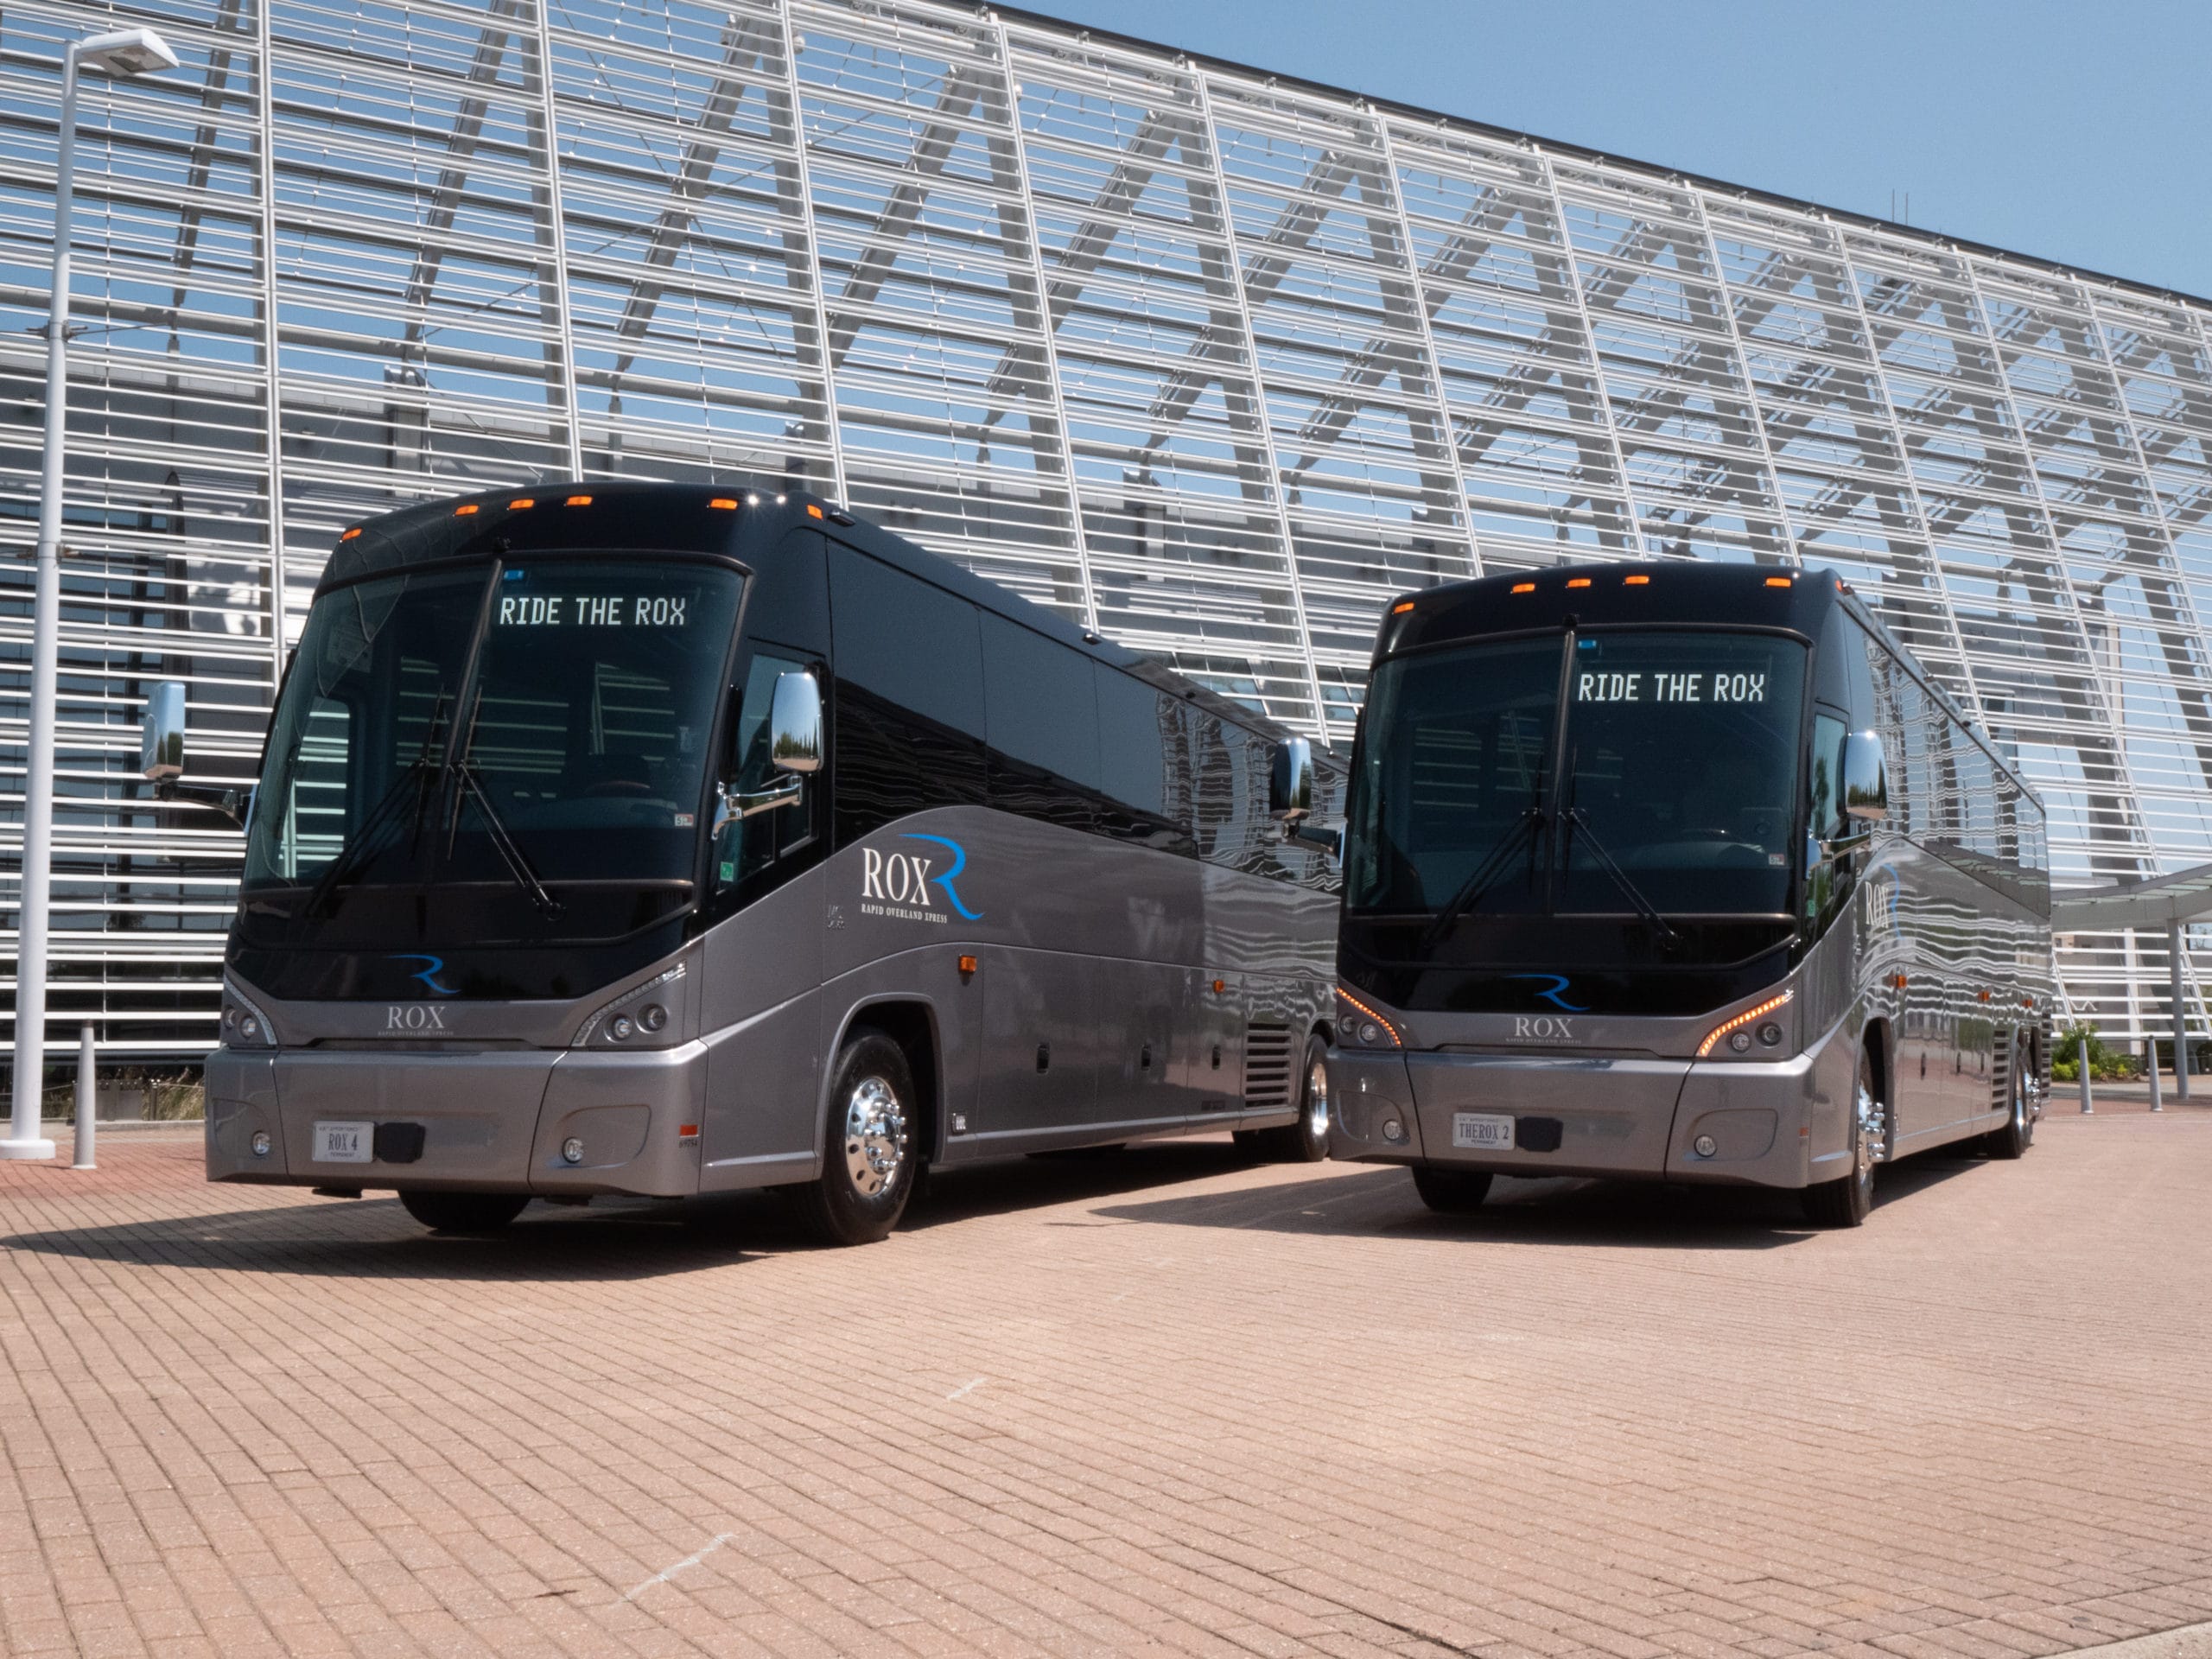 Two Rapid Overland Xpress (ROX) luxury motor coaches